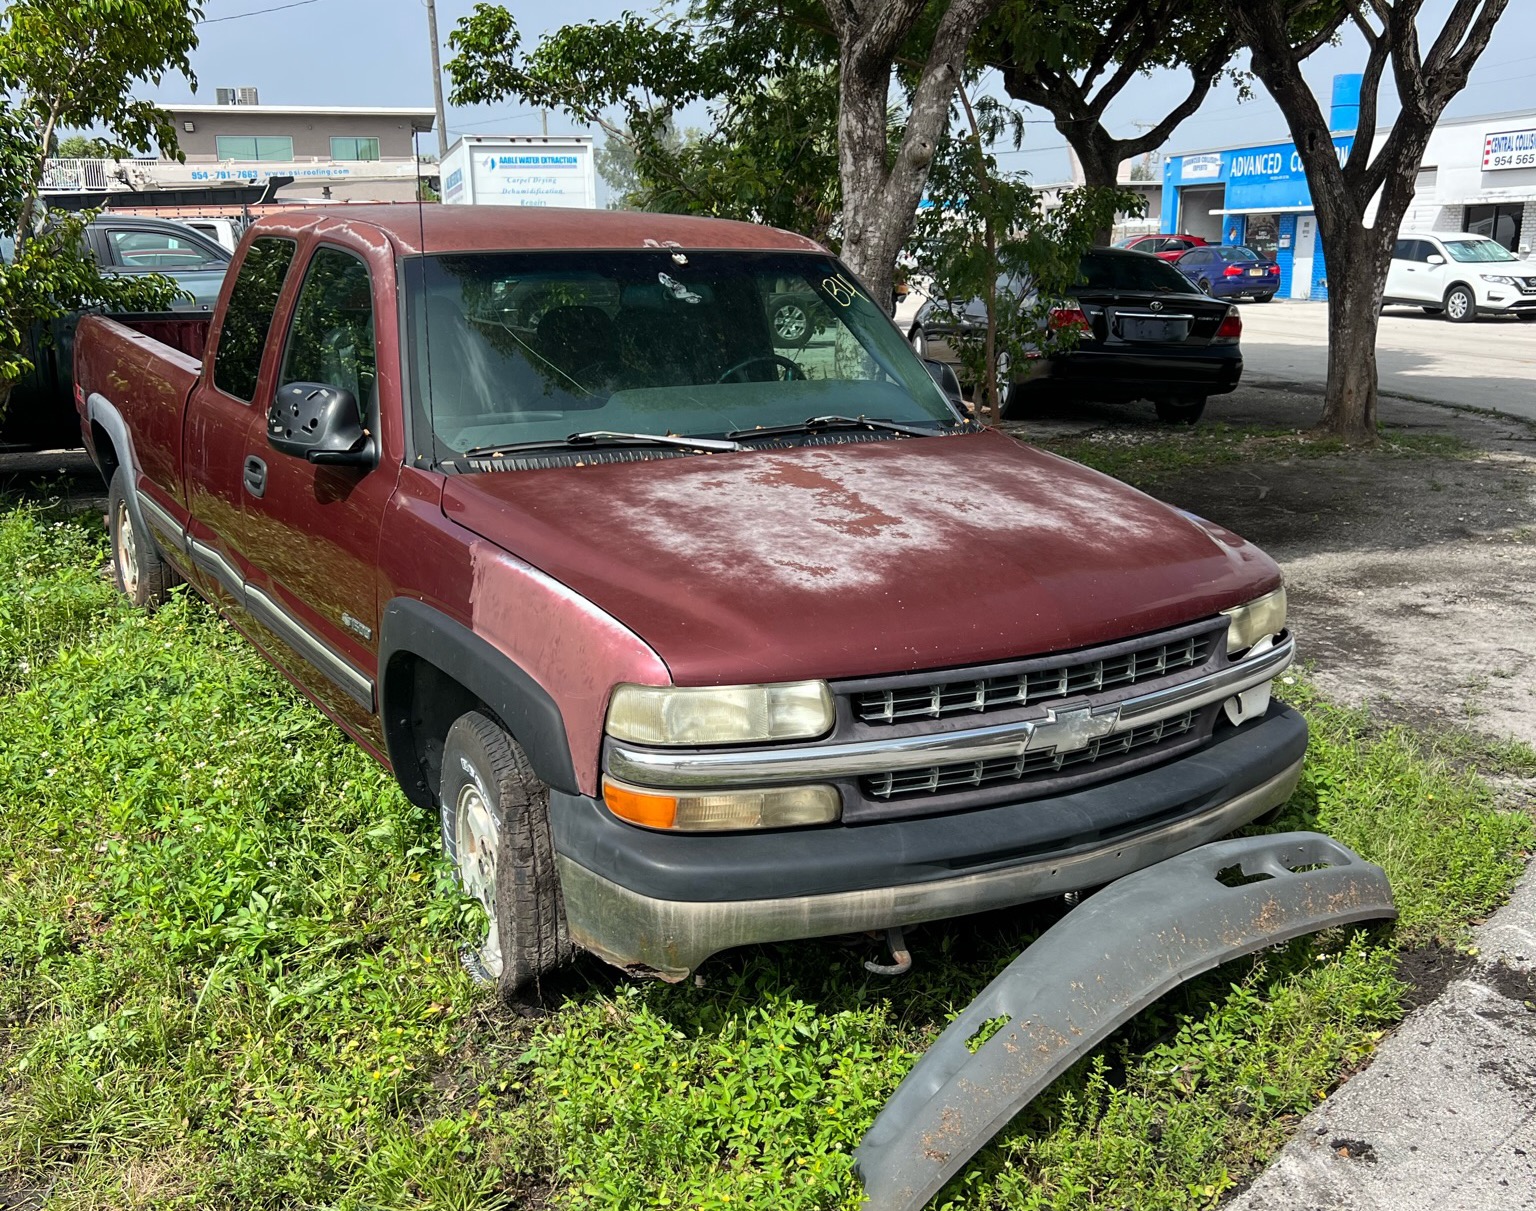 Cash for Junk Cars service in Coral Springs, FL - Instant Money Junk Cars